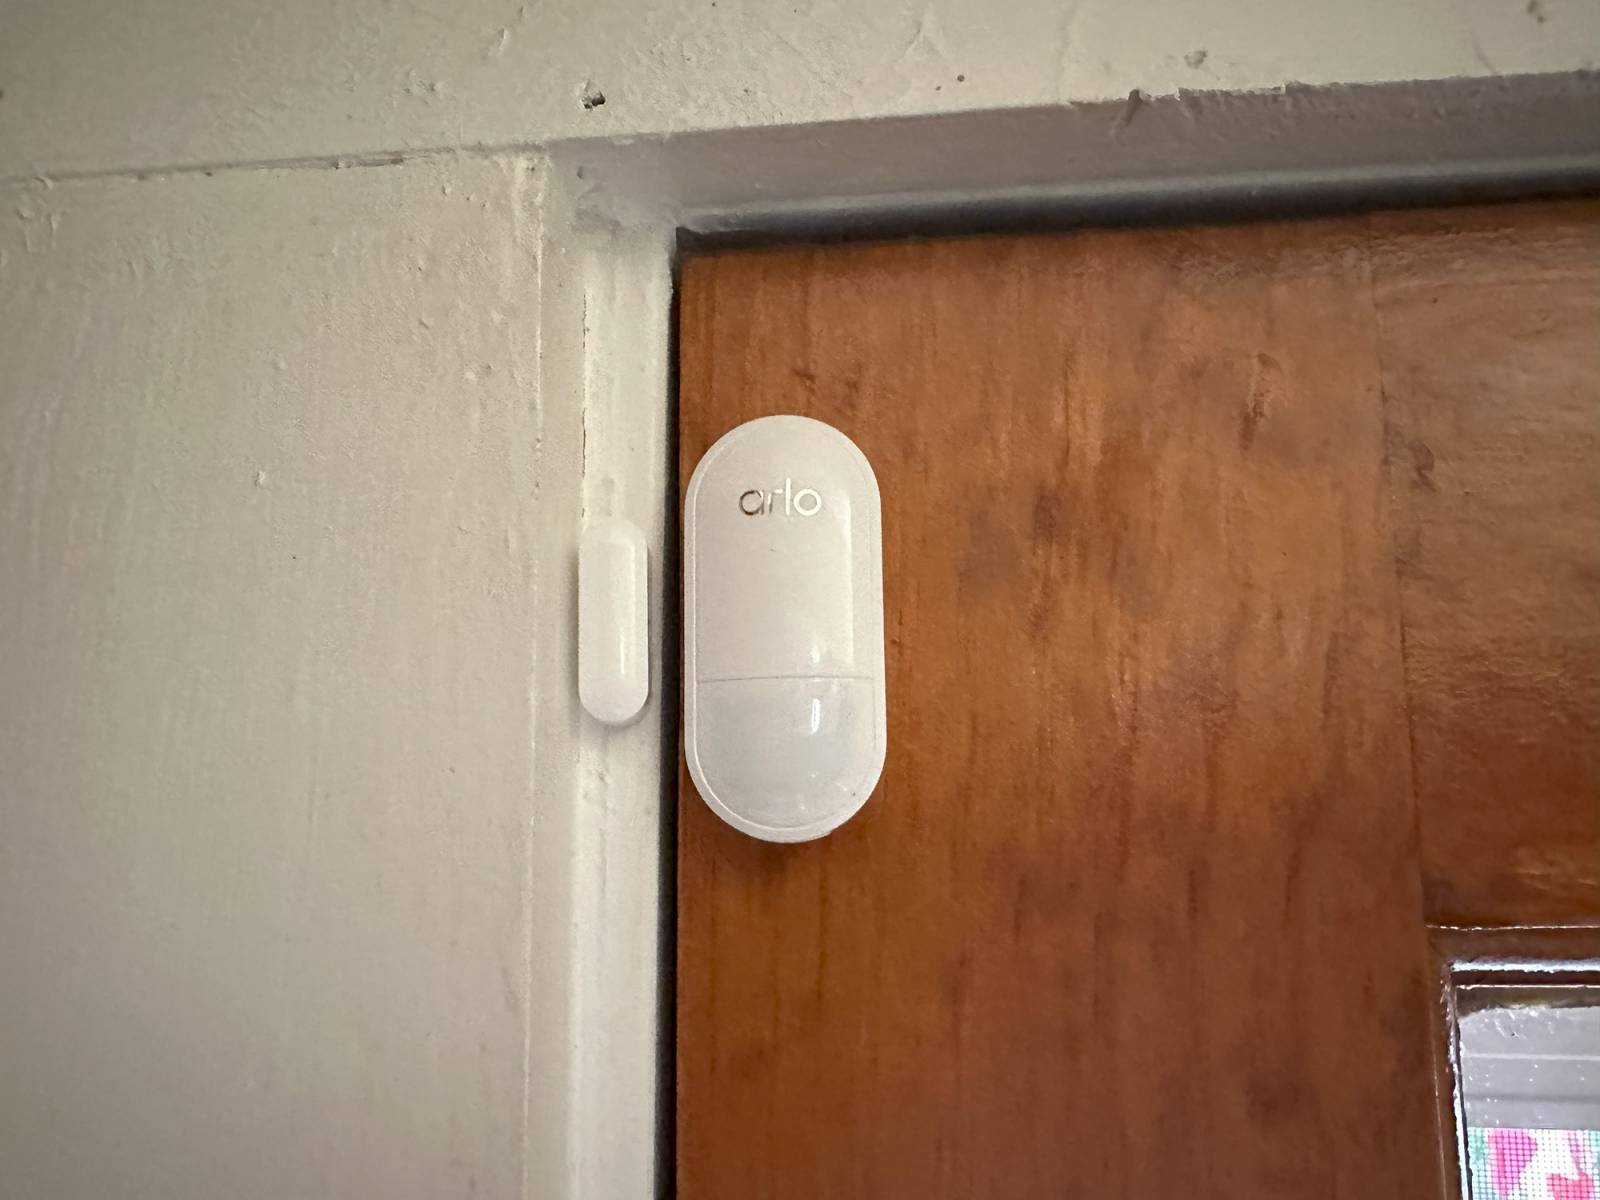 Arlo Home Security System sensor placed on door